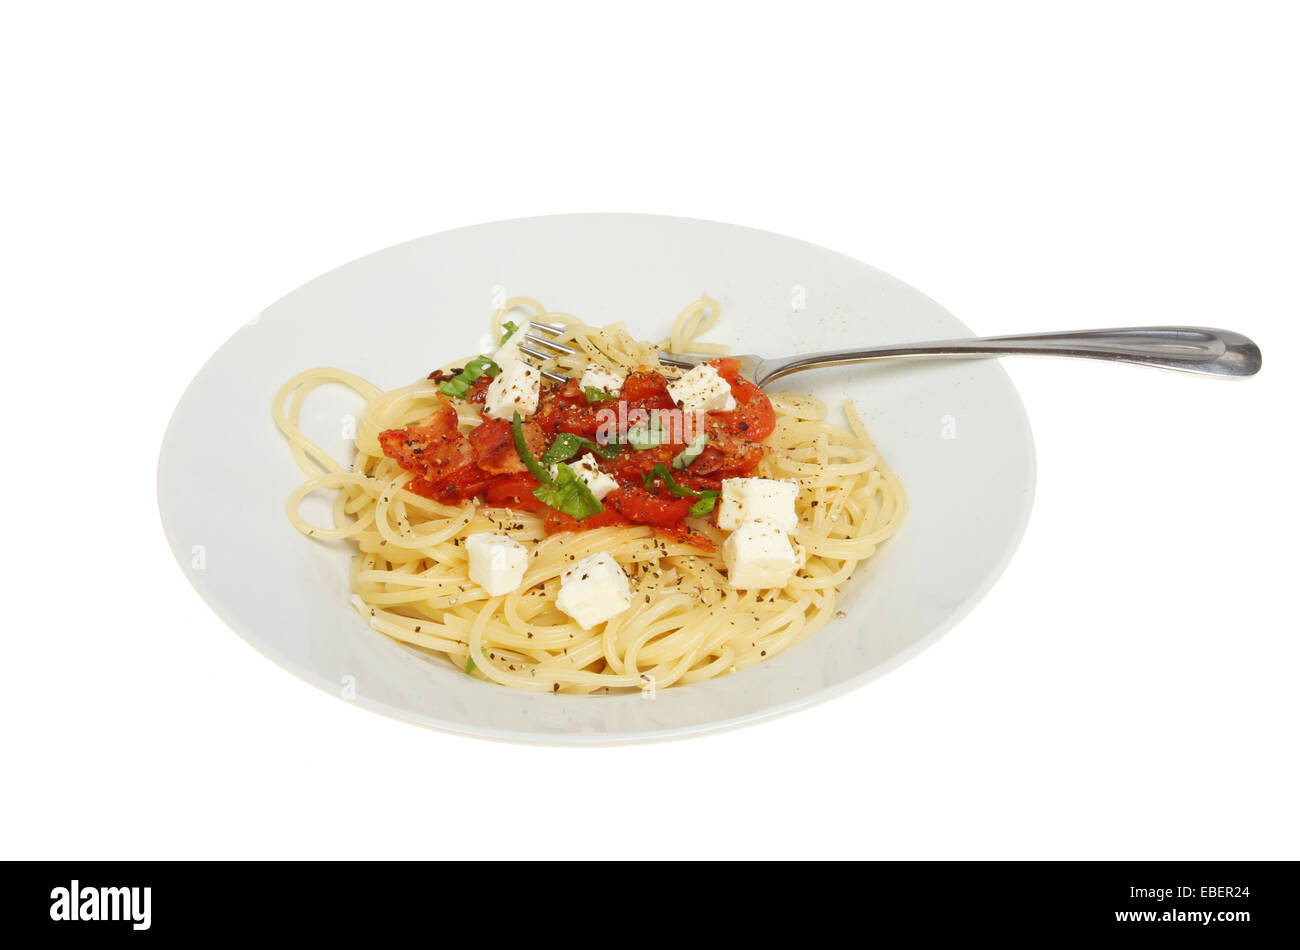 Panchetta,tomato,basil and feta cheese with spaghetti on a plate with a fork isolated against white Stock Photo